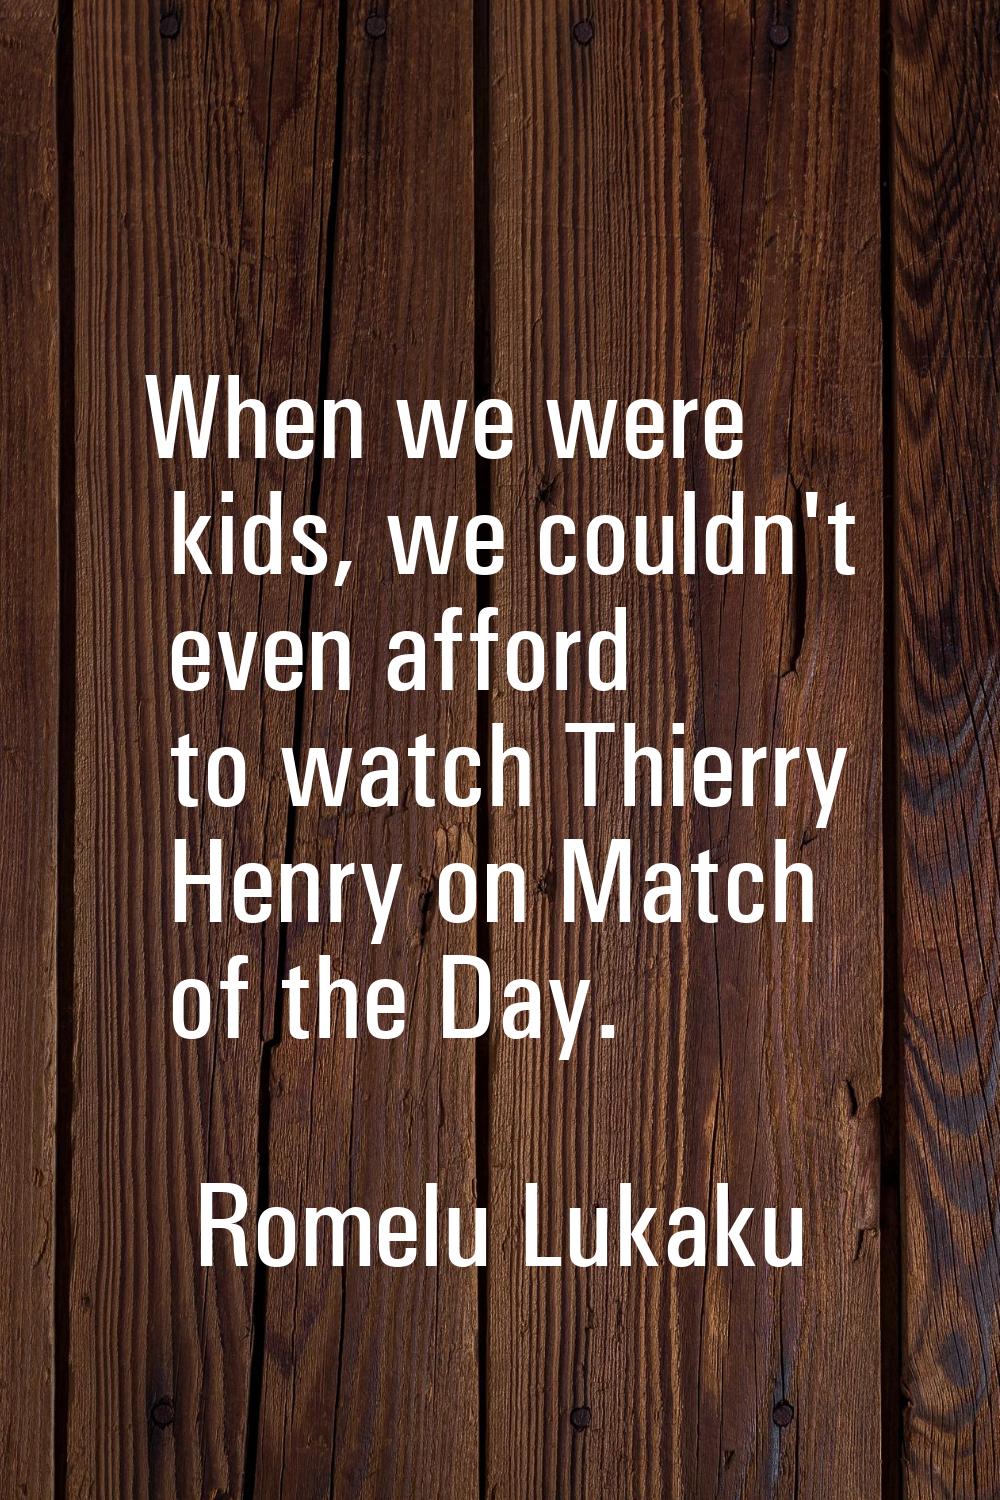 When we were kids, we couldn't even afford to watch Thierry Henry on Match of the Day.